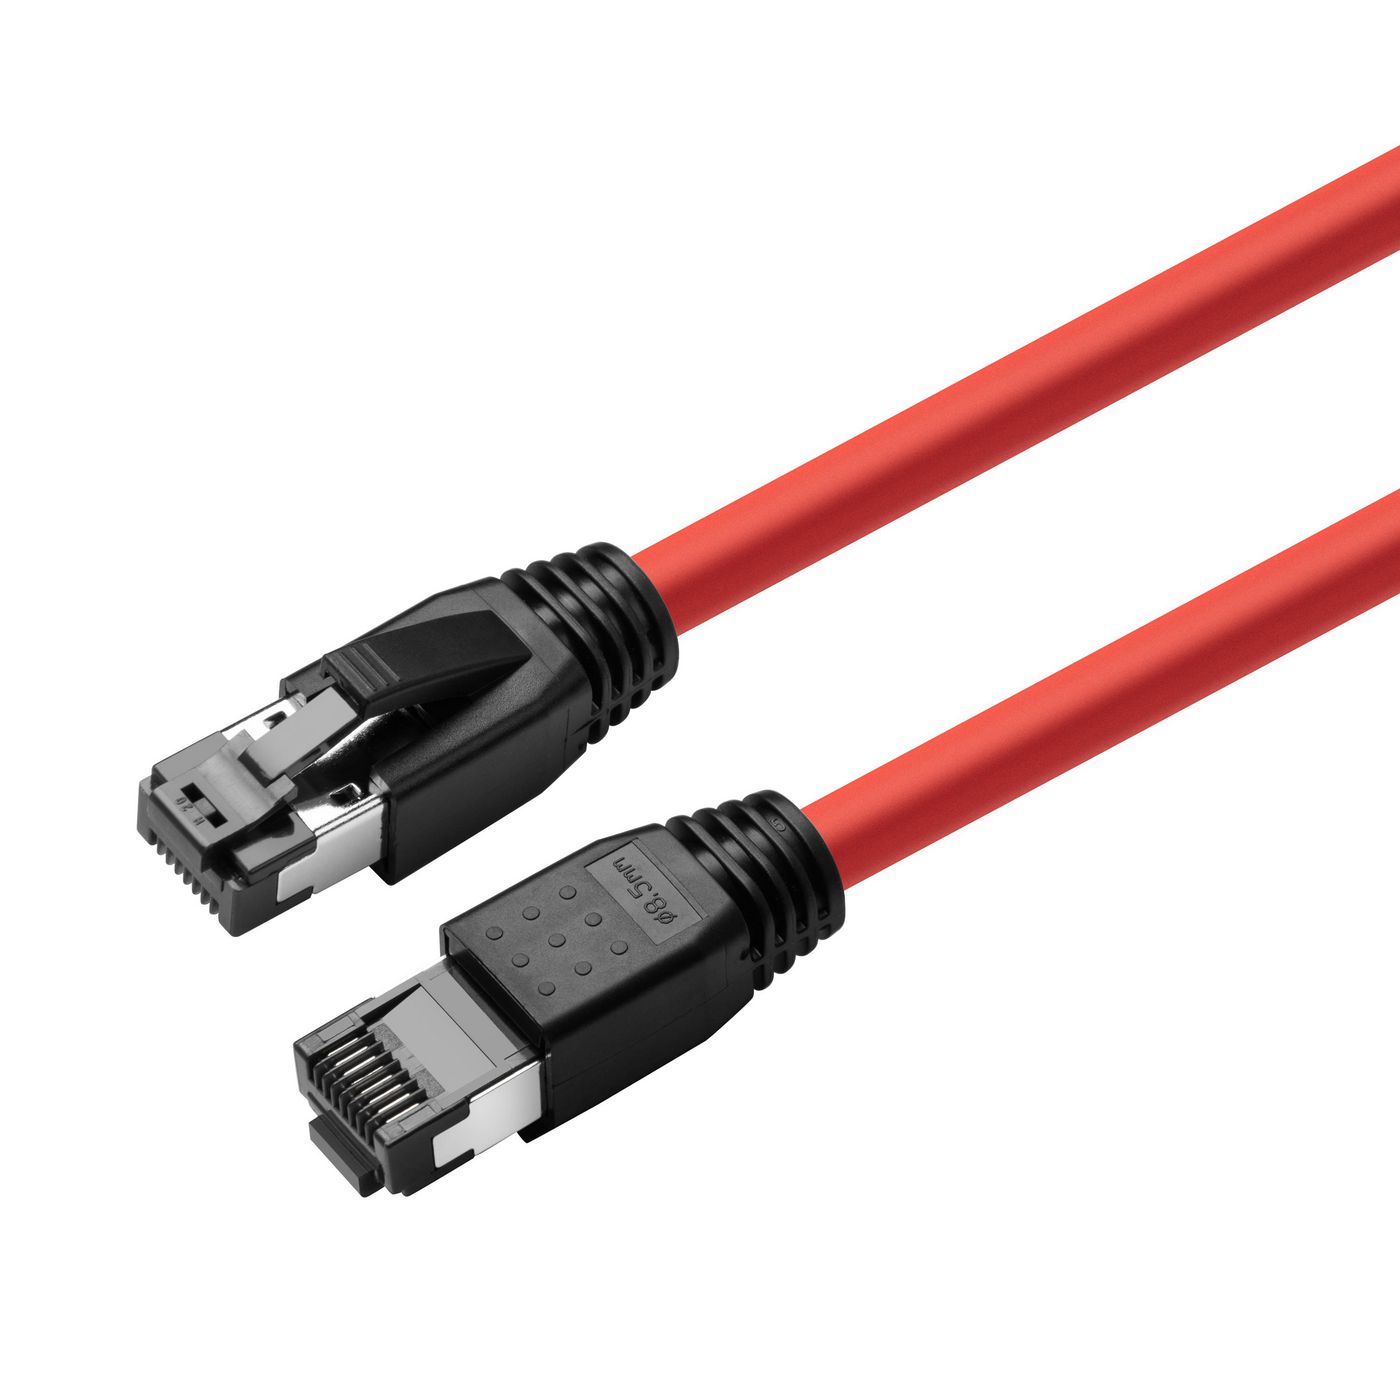 Patch Cable - Cat 8.1 - S/ftp - 7.5m - Red